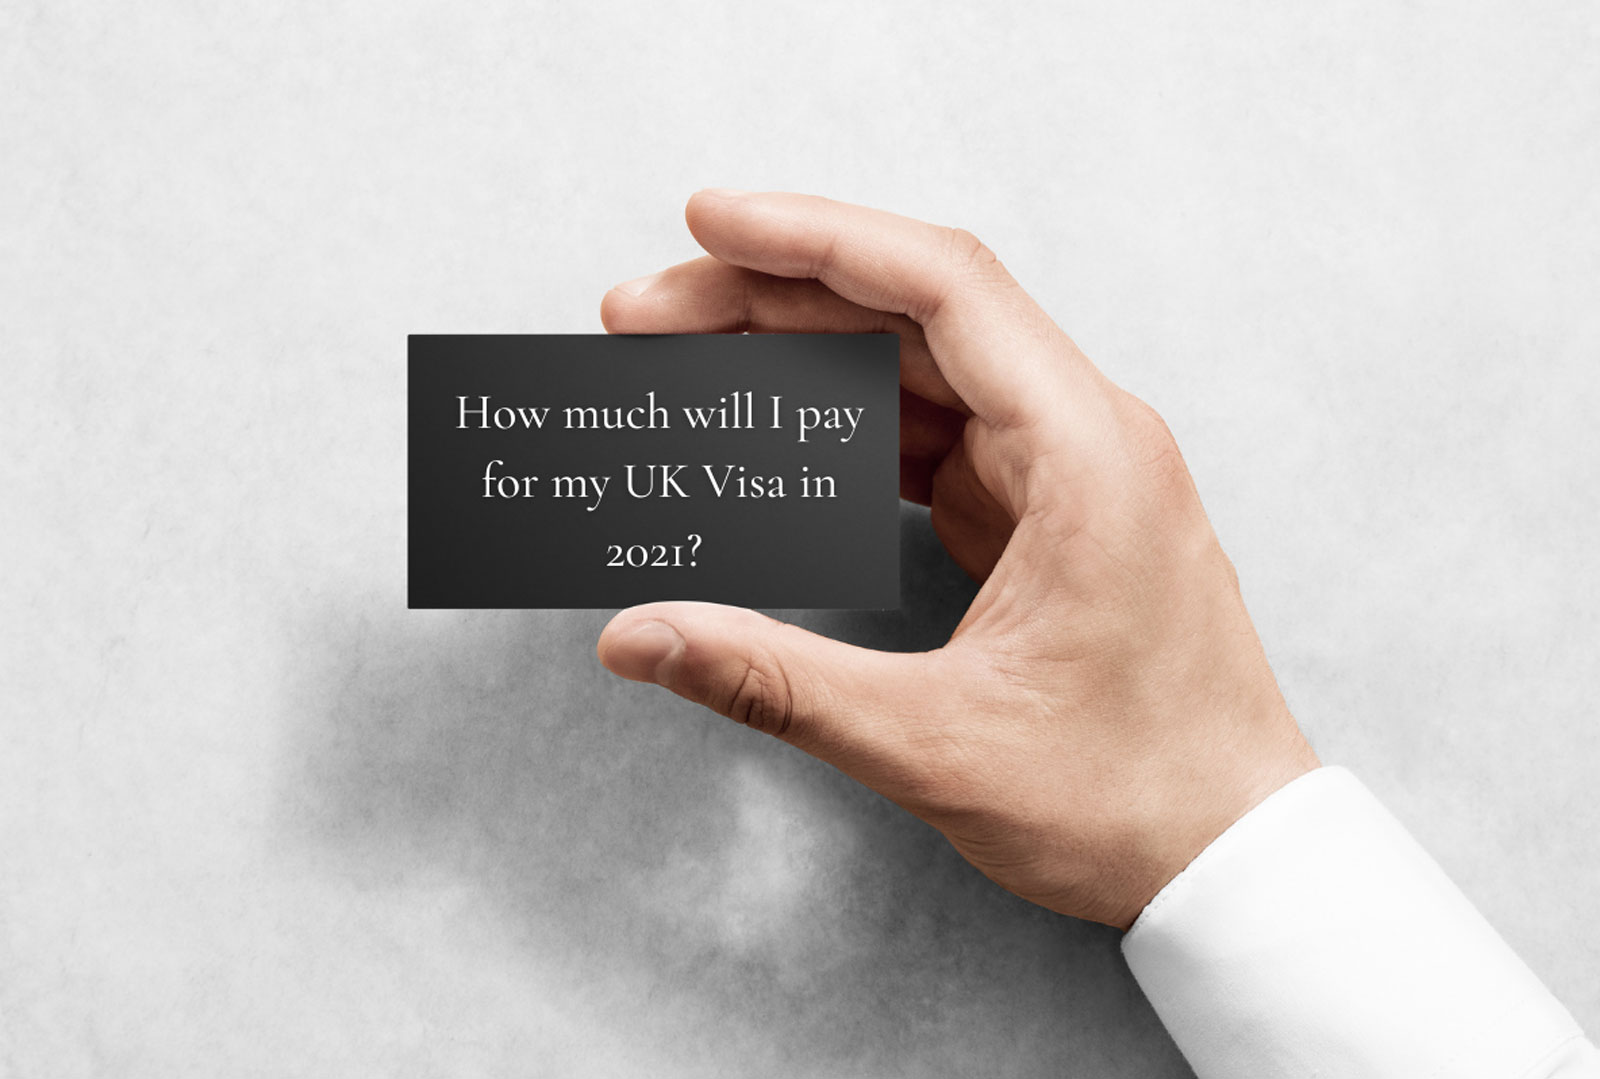 How much will I pay for my UK Visa in 2021?